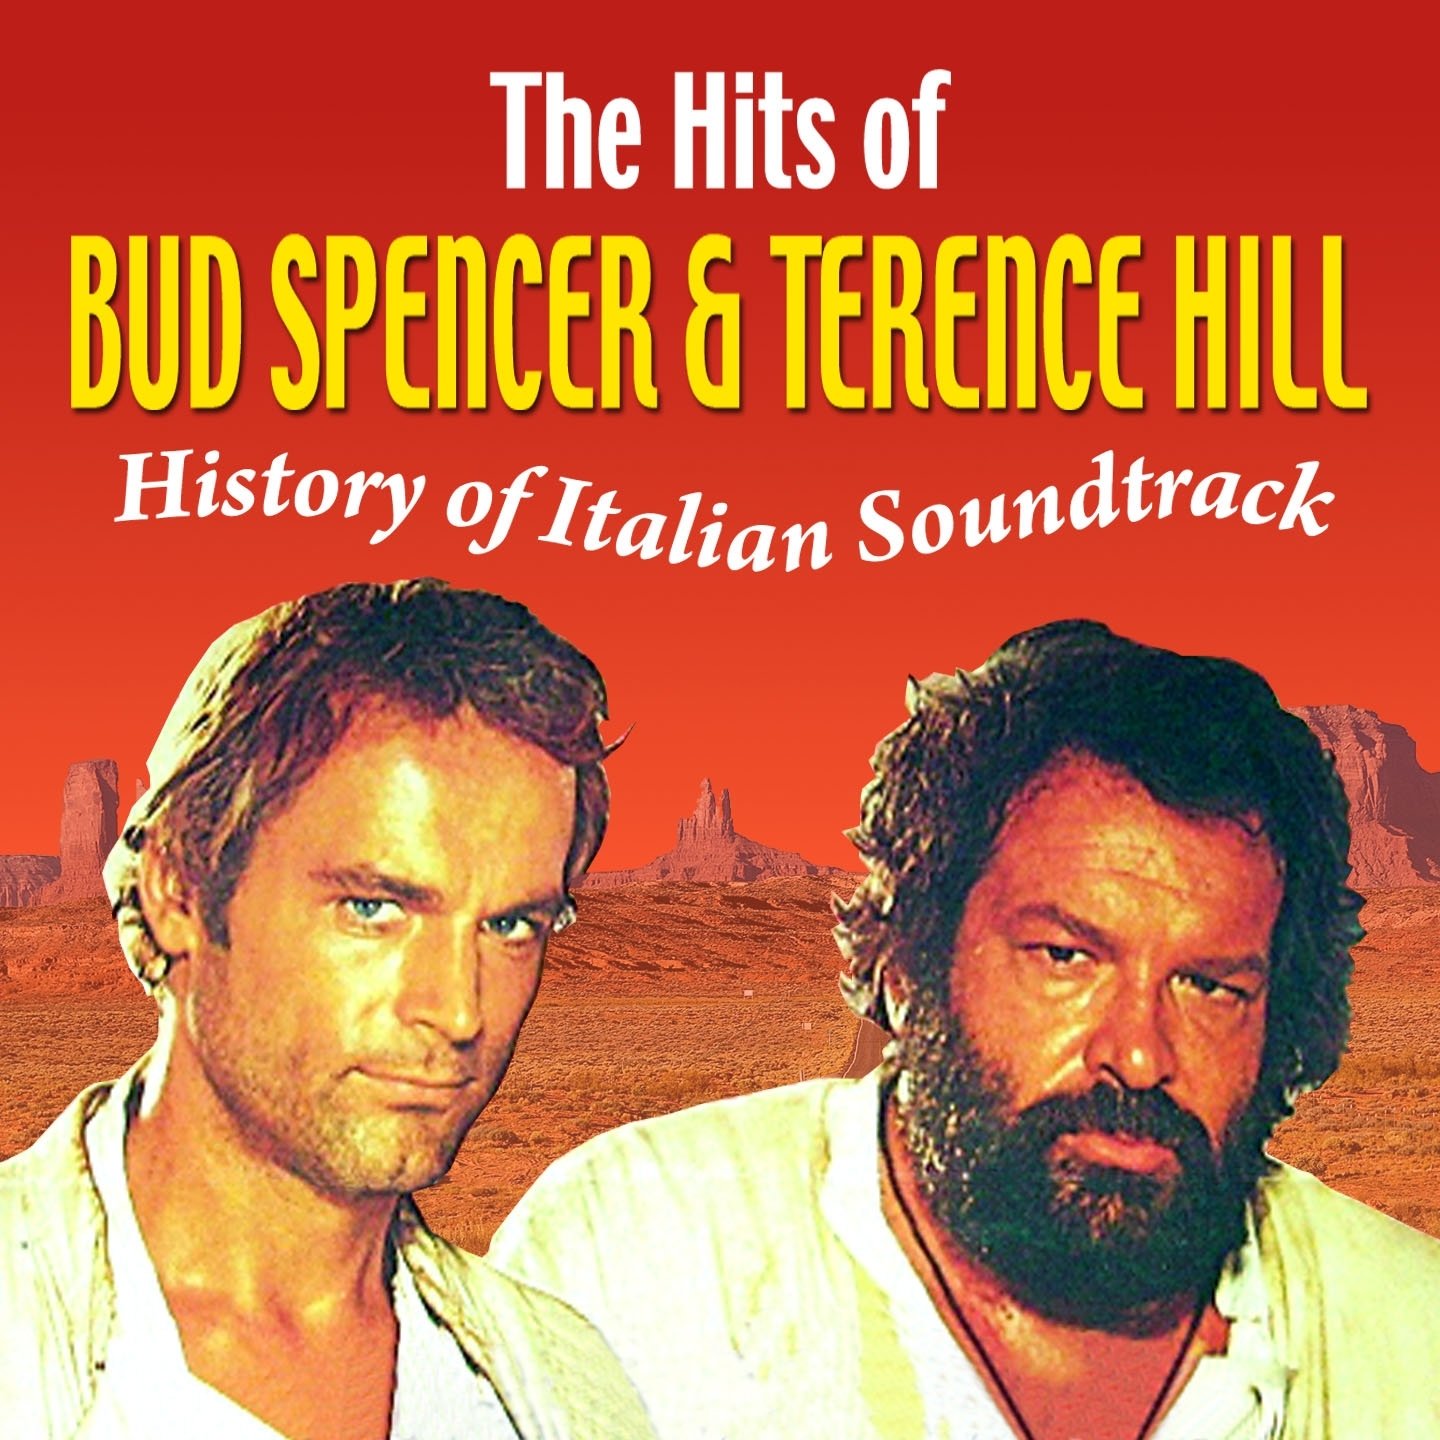 The Hits of Bud Spencer & Terence Hill (History of Italian